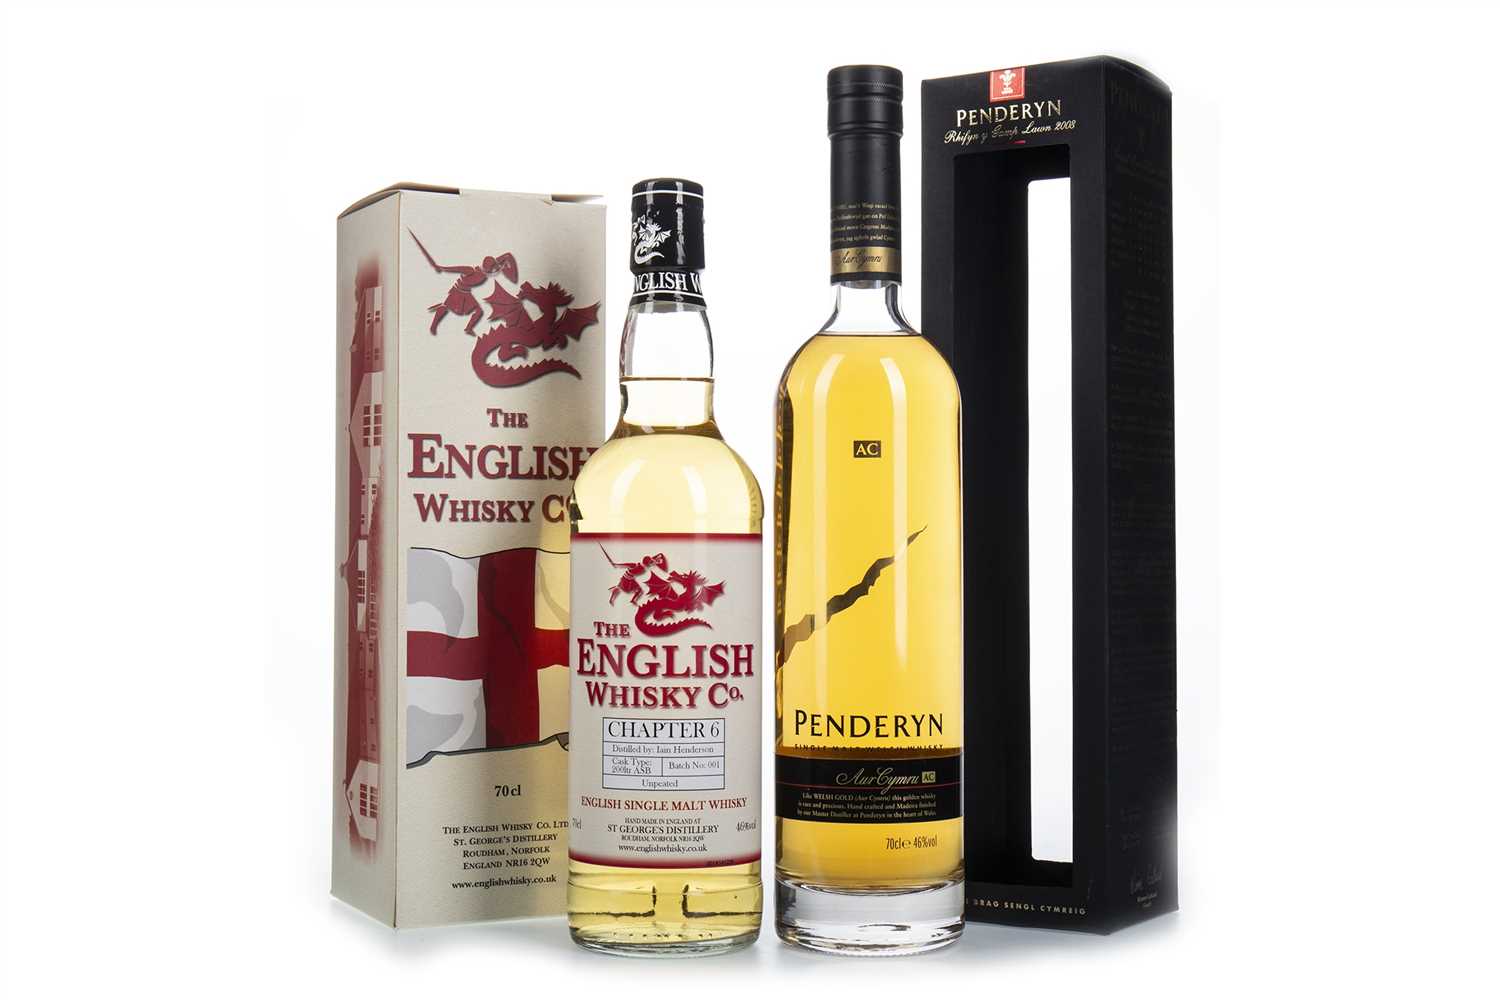 Lot 329 - ST GEORGES CHAPTER 6 AND PENDERYN GRAND SLAM EDITION 2008